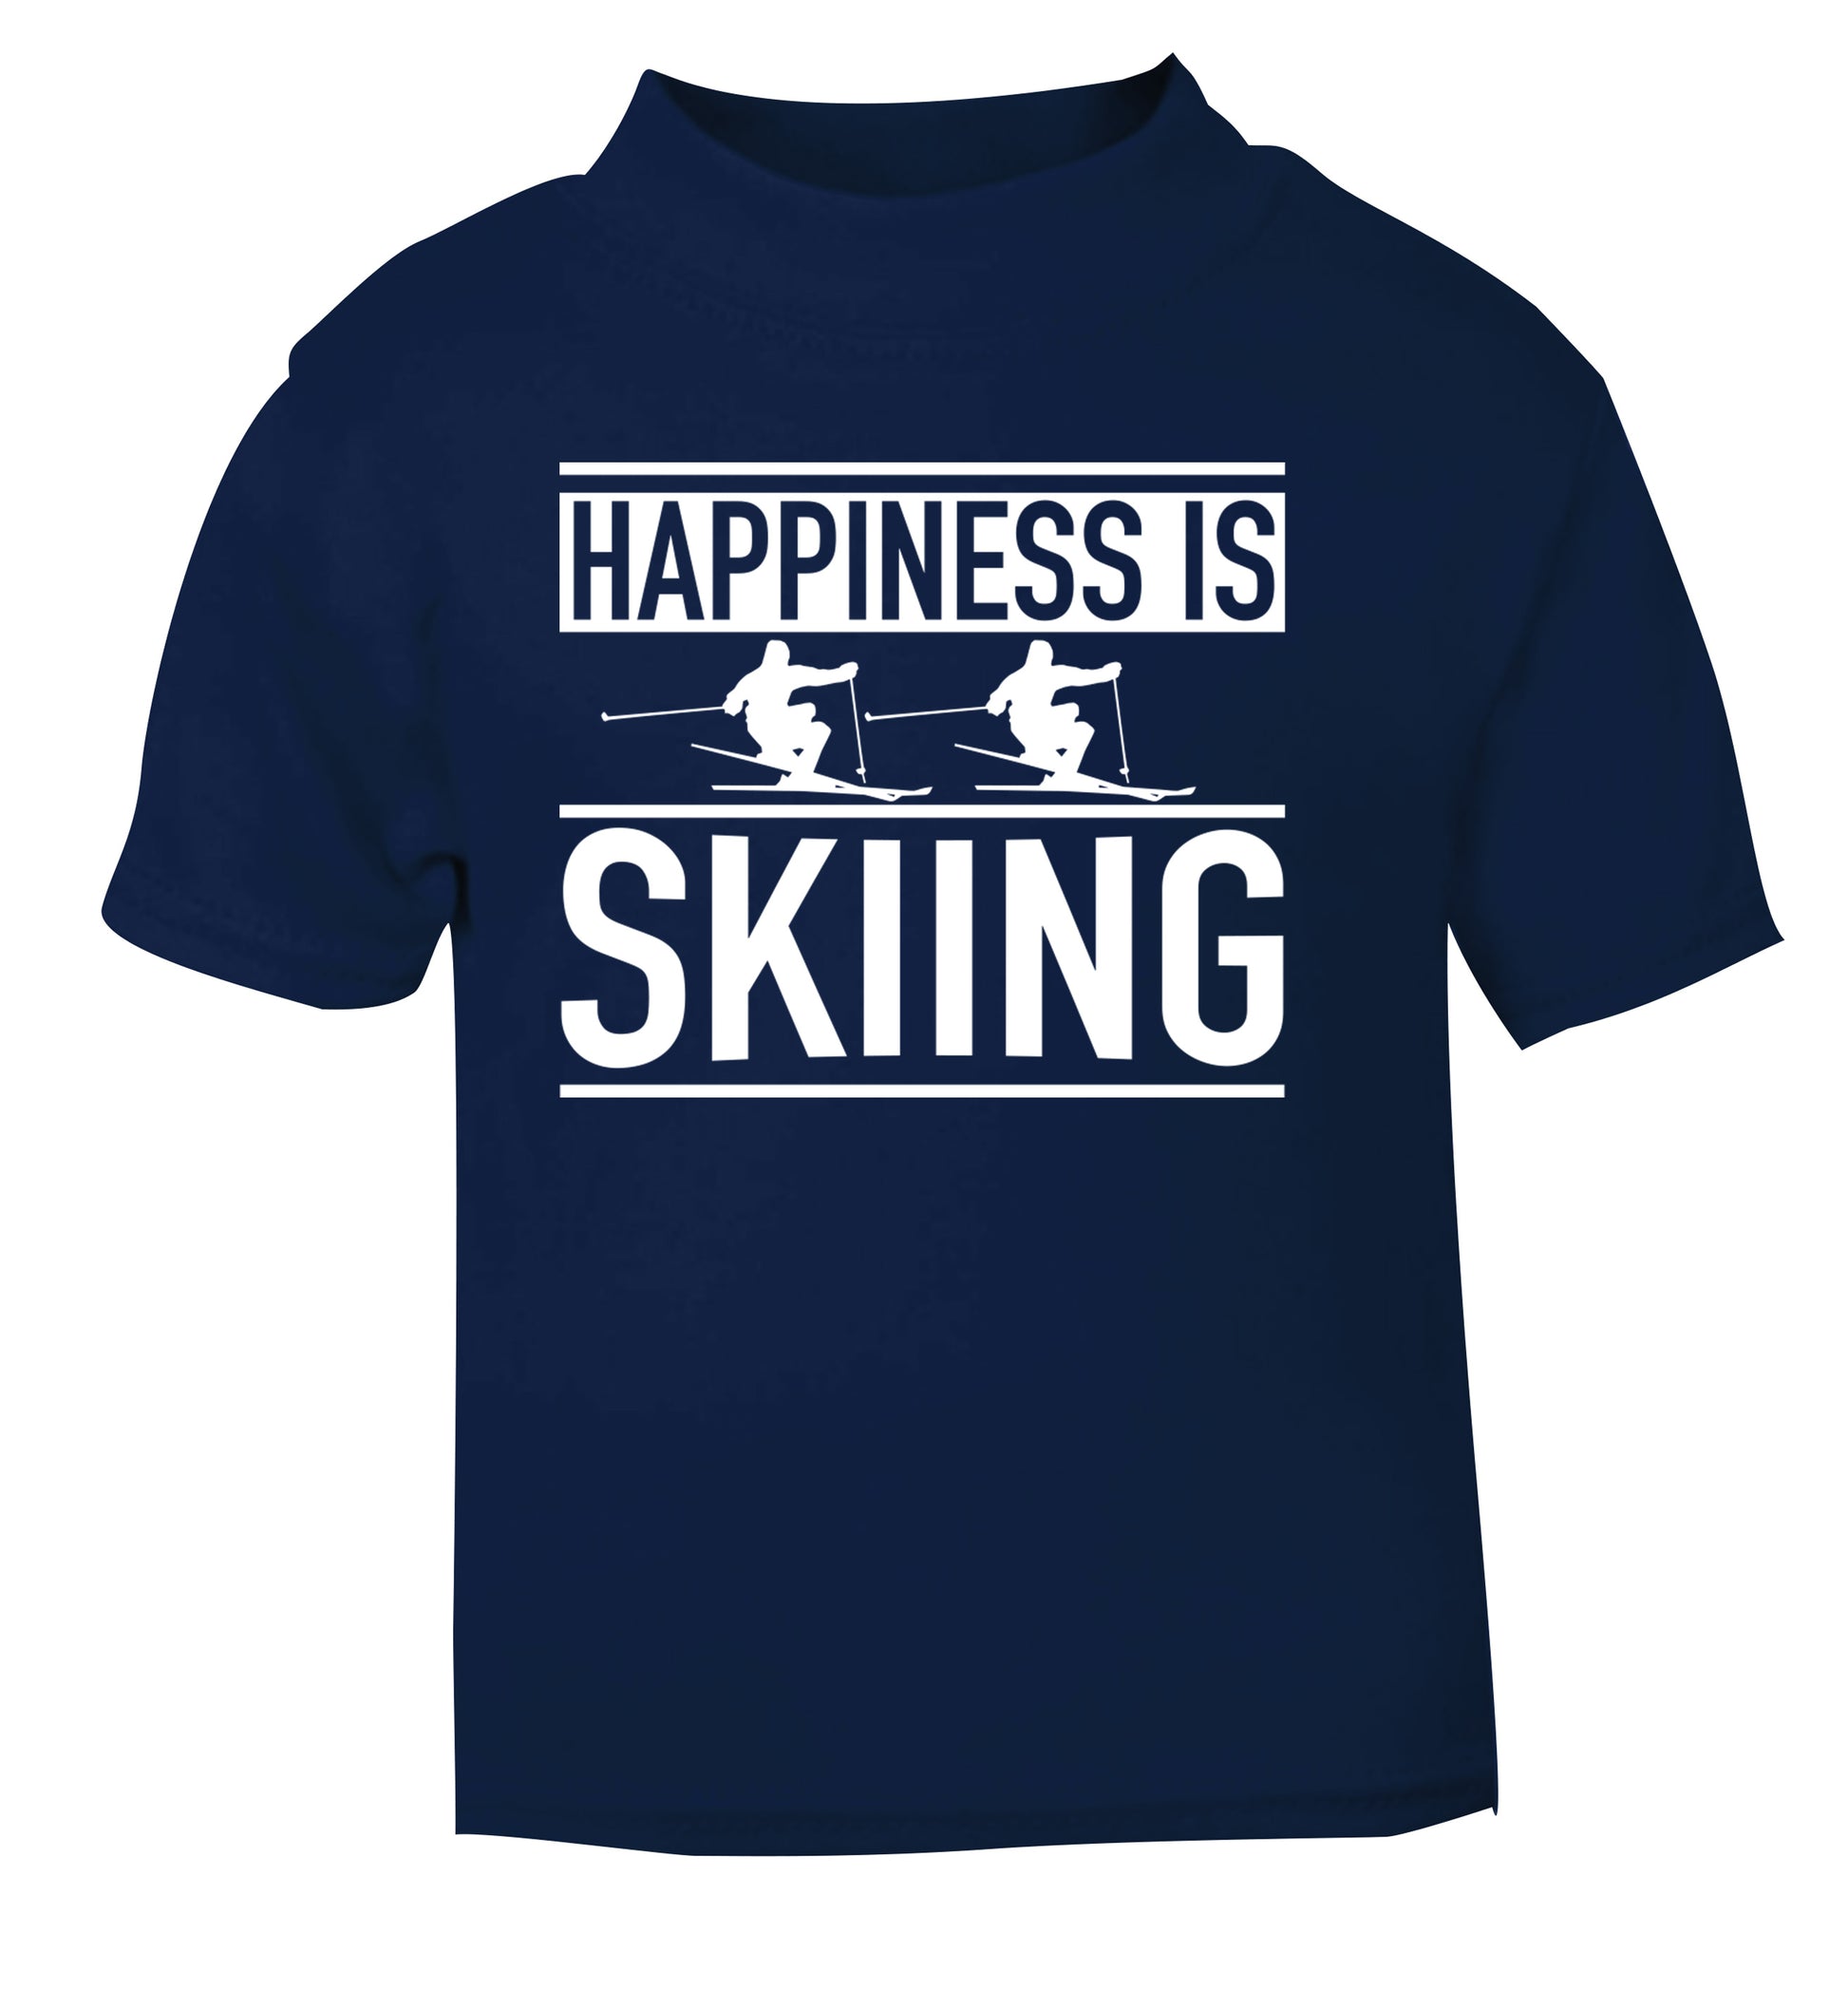 Happiness is skiing navy Baby Toddler Tshirt 2 Years